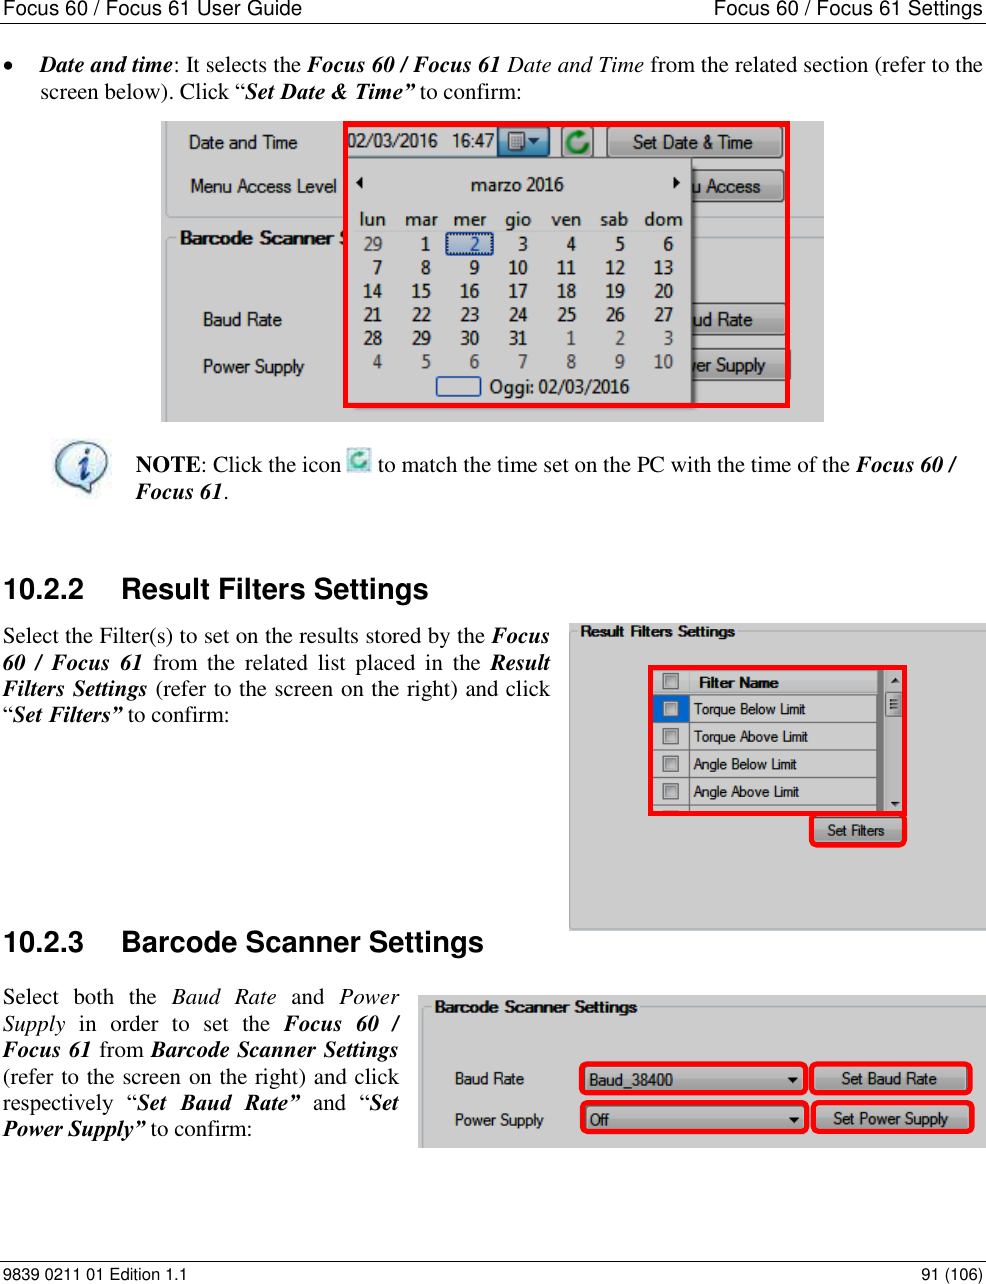 Focus 60 / Focus 61 User Guide  Focus 60 / Focus 61 Settings 9839 0211 01 Edition 1.1    91 (106)  Date and time: It selects the Focus 60 / Focus 61 Date and Time from the related section (refer to the screen below). Click “Set Date &amp; Time” to confirm:   NOTE: Click the icon   to match the time set on the PC with the time of the Focus 60 / Focus 61.  10.2.2  Result Filters Settings Select the Filter(s) to set on the results stored by the Focus 60  /  Focus  61  from  the  related  list  placed  in  the  Result Filters Settings (refer to the screen on the right) and click “Set Filters” to confirm:      10.2.3  Barcode Scanner Settings Select  both  the  Baud  Rate  and  Power Supply  in  order  to  set  the  Focus  60  / Focus 61 from Barcode Scanner Settings (refer to the screen on the right) and click respectively  “Set  Baud  Rate” and  “Set Power Supply” to confirm:  